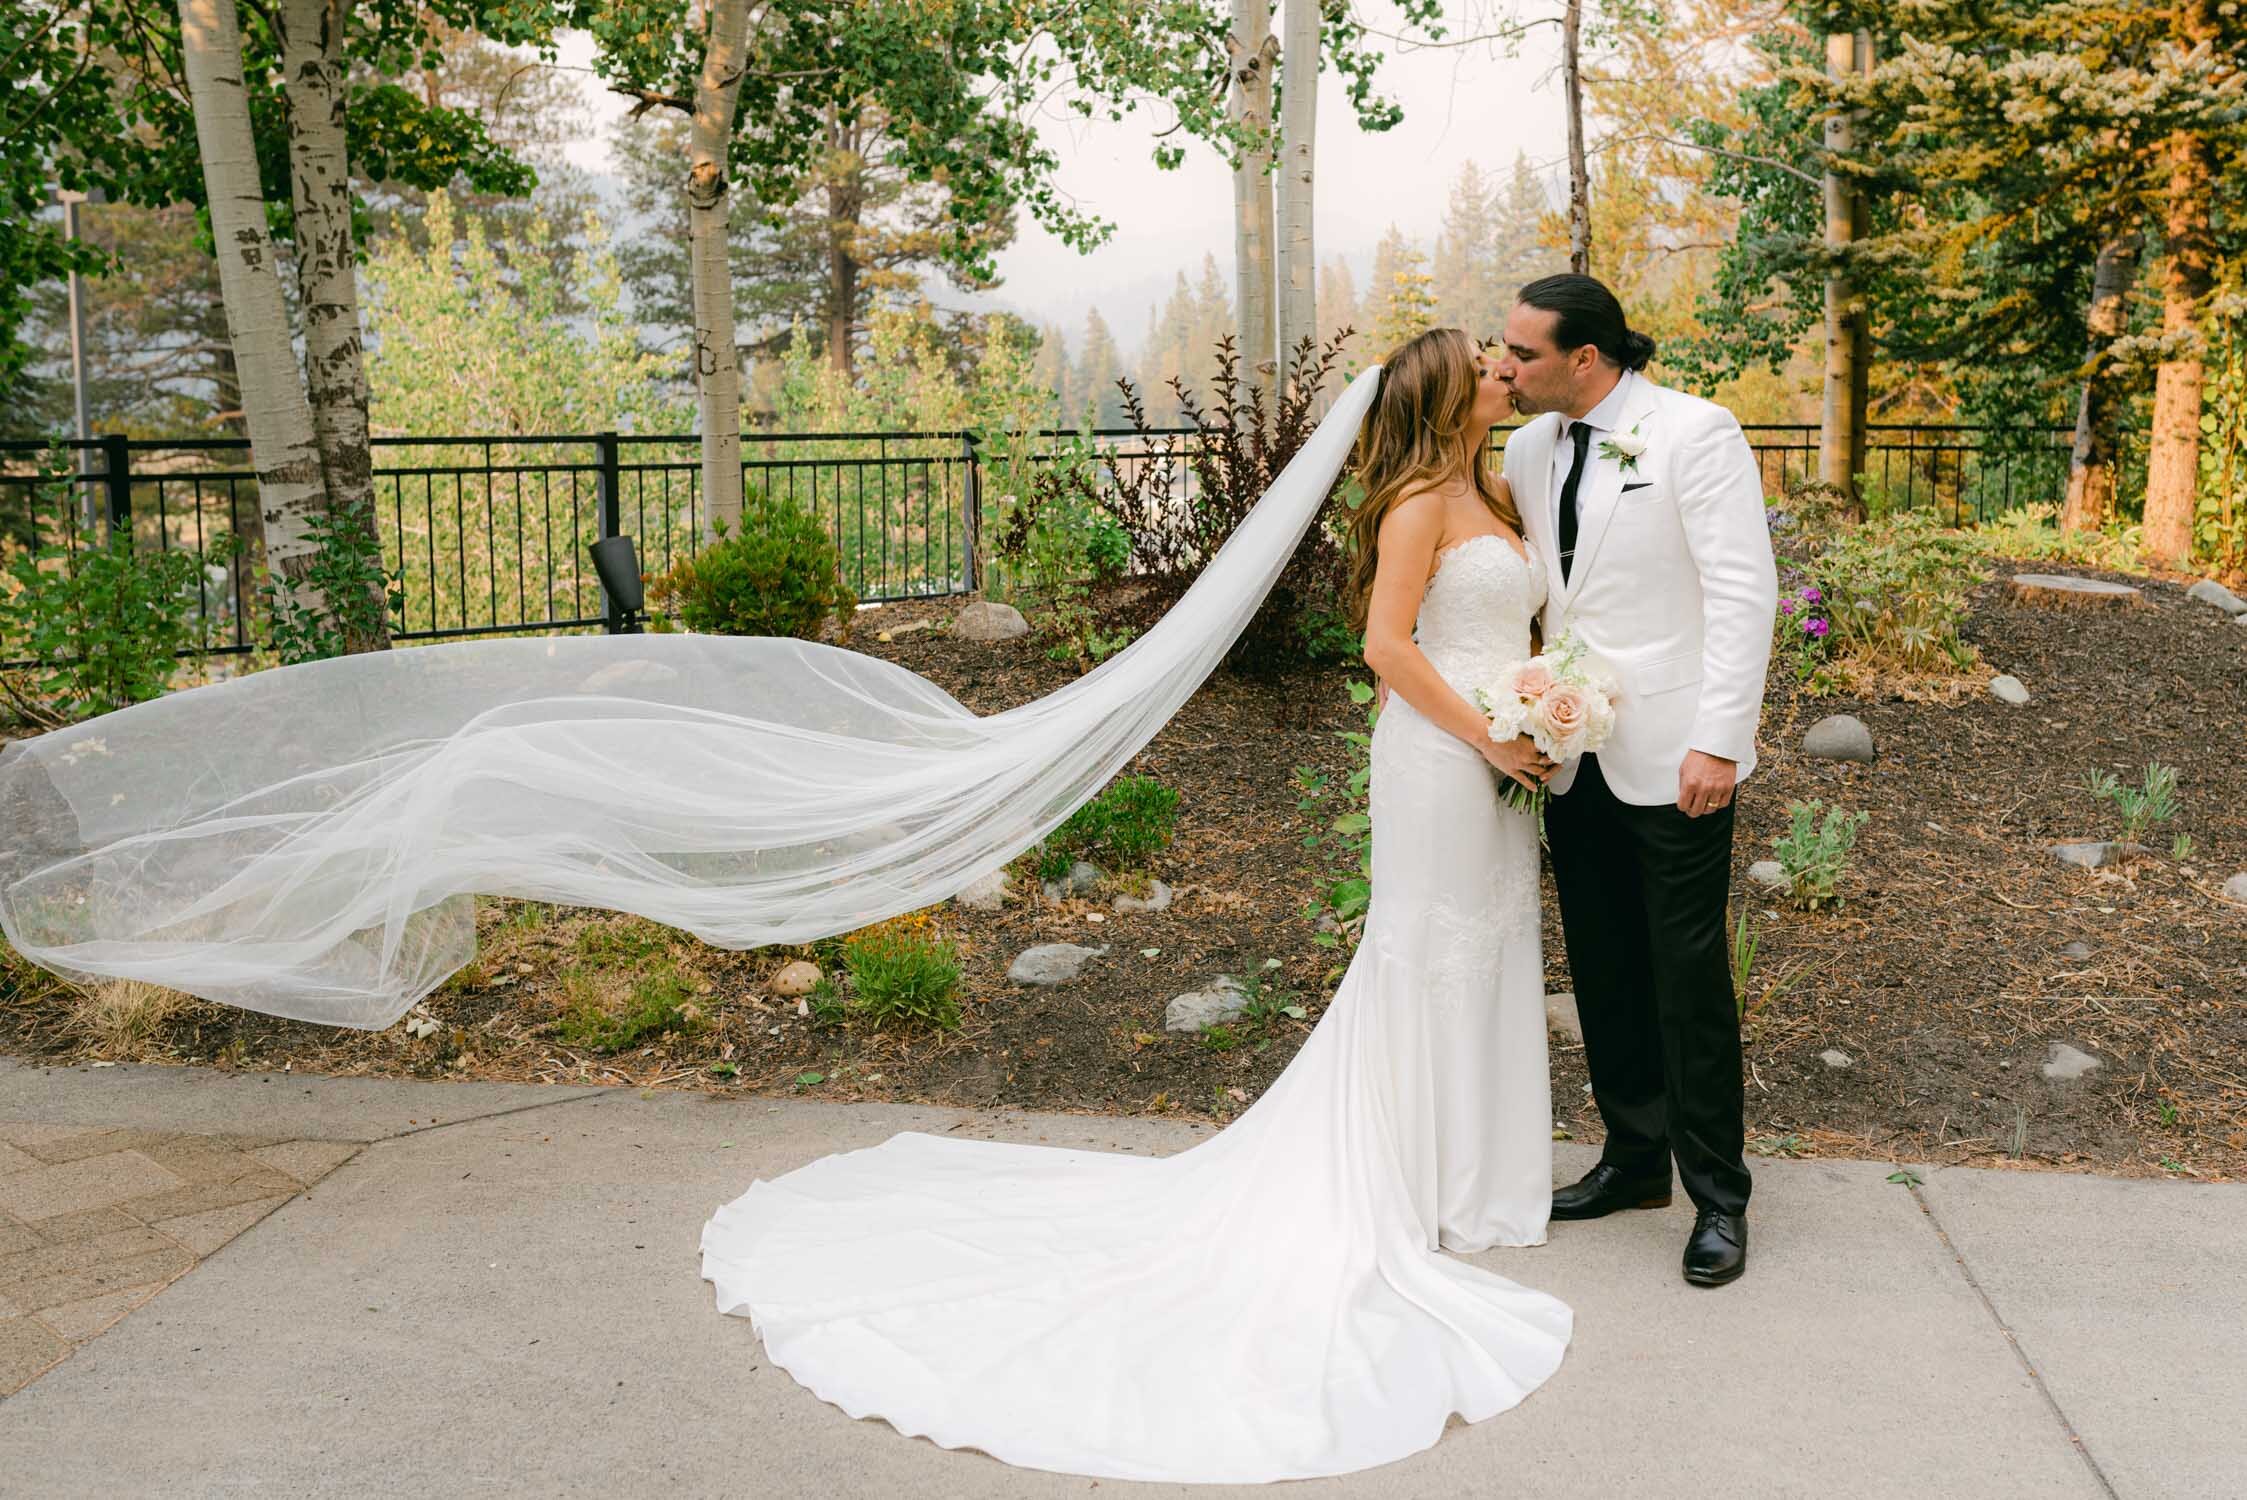 Palisades wedding, photo of couple kissing and bride's veil flying in the air